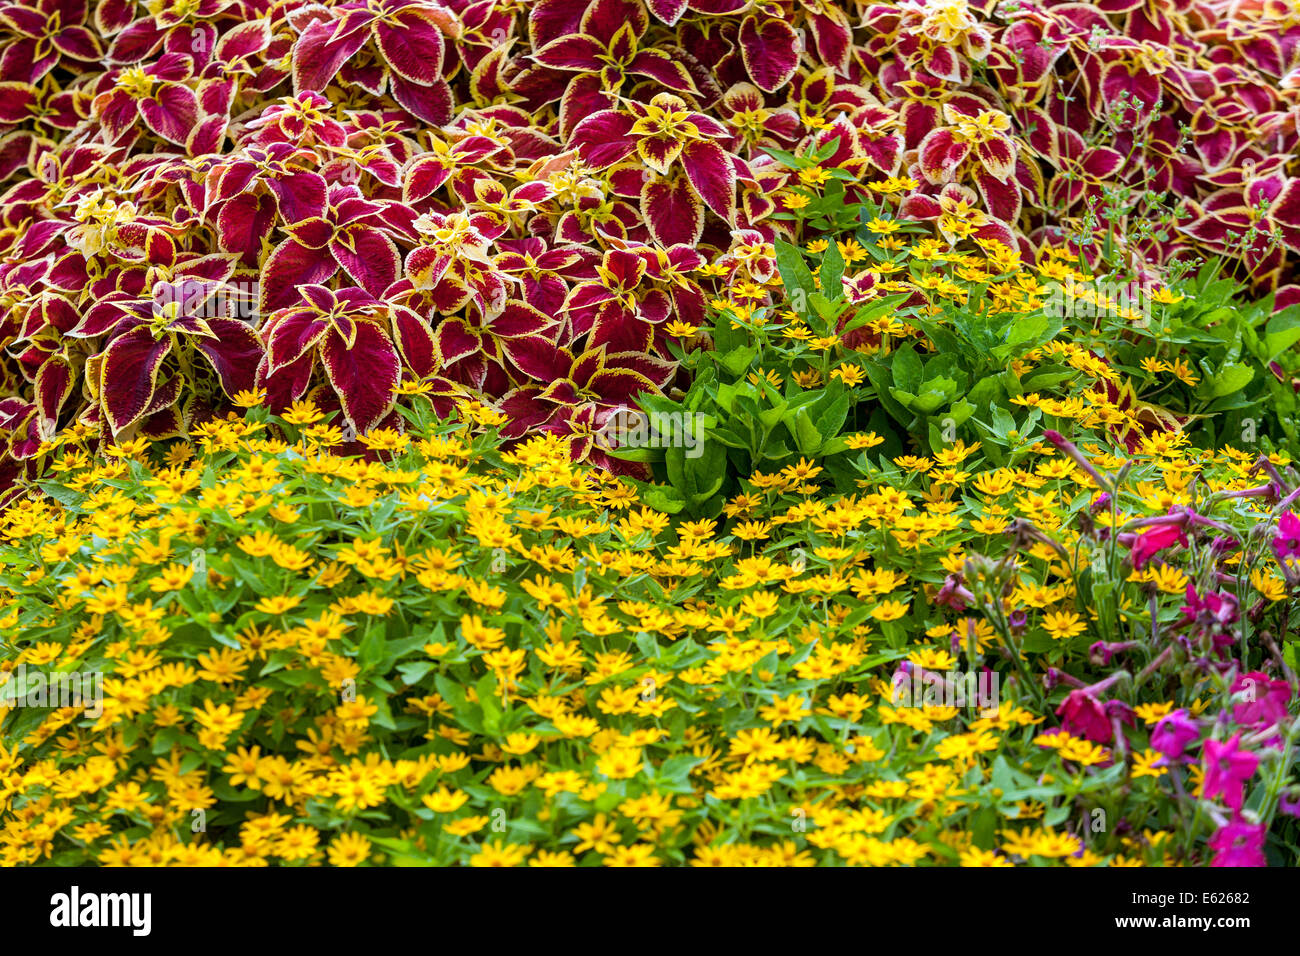 Mixed colorful flower bed of annual flowers, Coleus 'Wizard scarlet', Melampodium paludosum Butter Daisy, beautiful garden flowers bedding plants Stock Photo